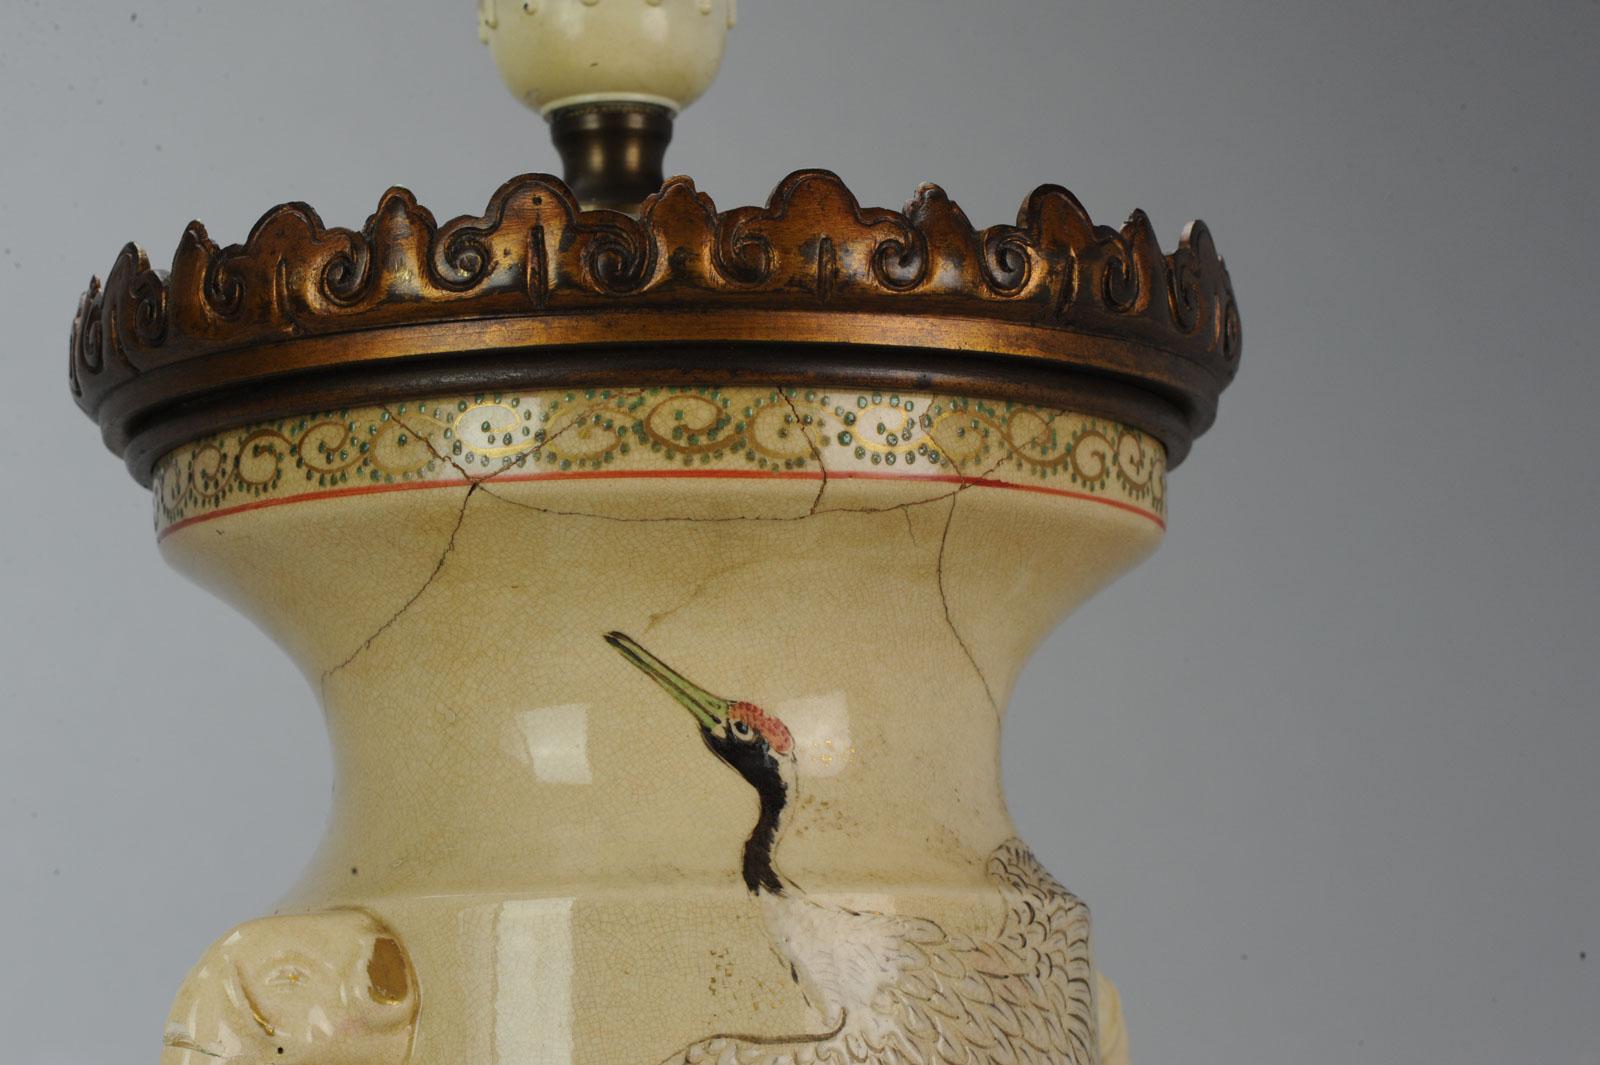 Lovely Antique Satsuma Lamp Vase Set with Cranes and Turtles, Japan 19th Century For Sale 10